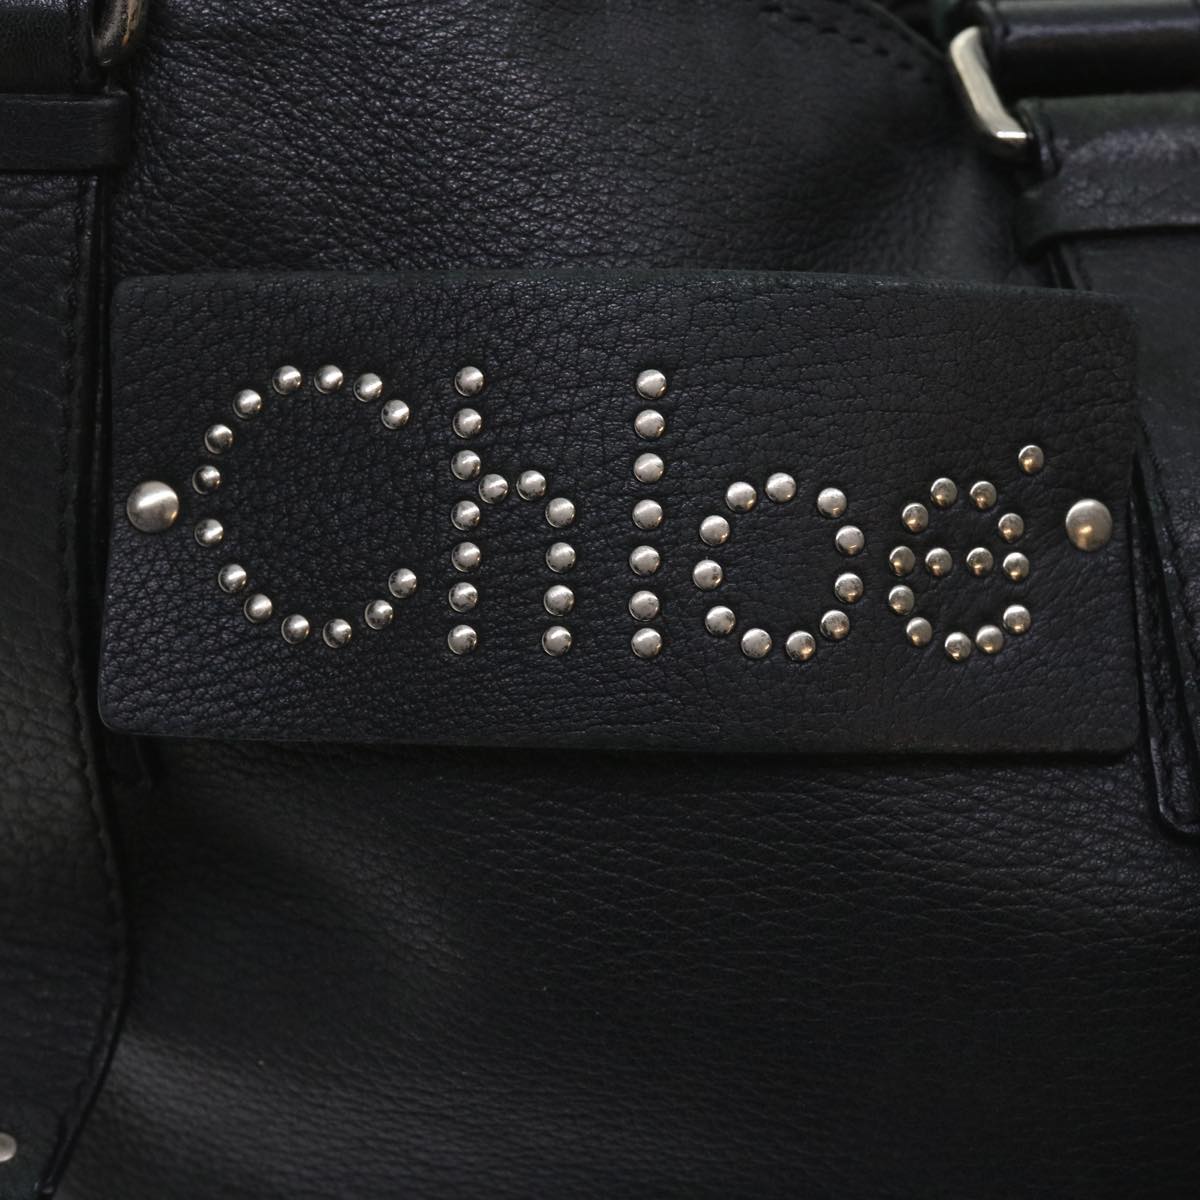 Chloe Tote Bag Leather Black Auth bs9712